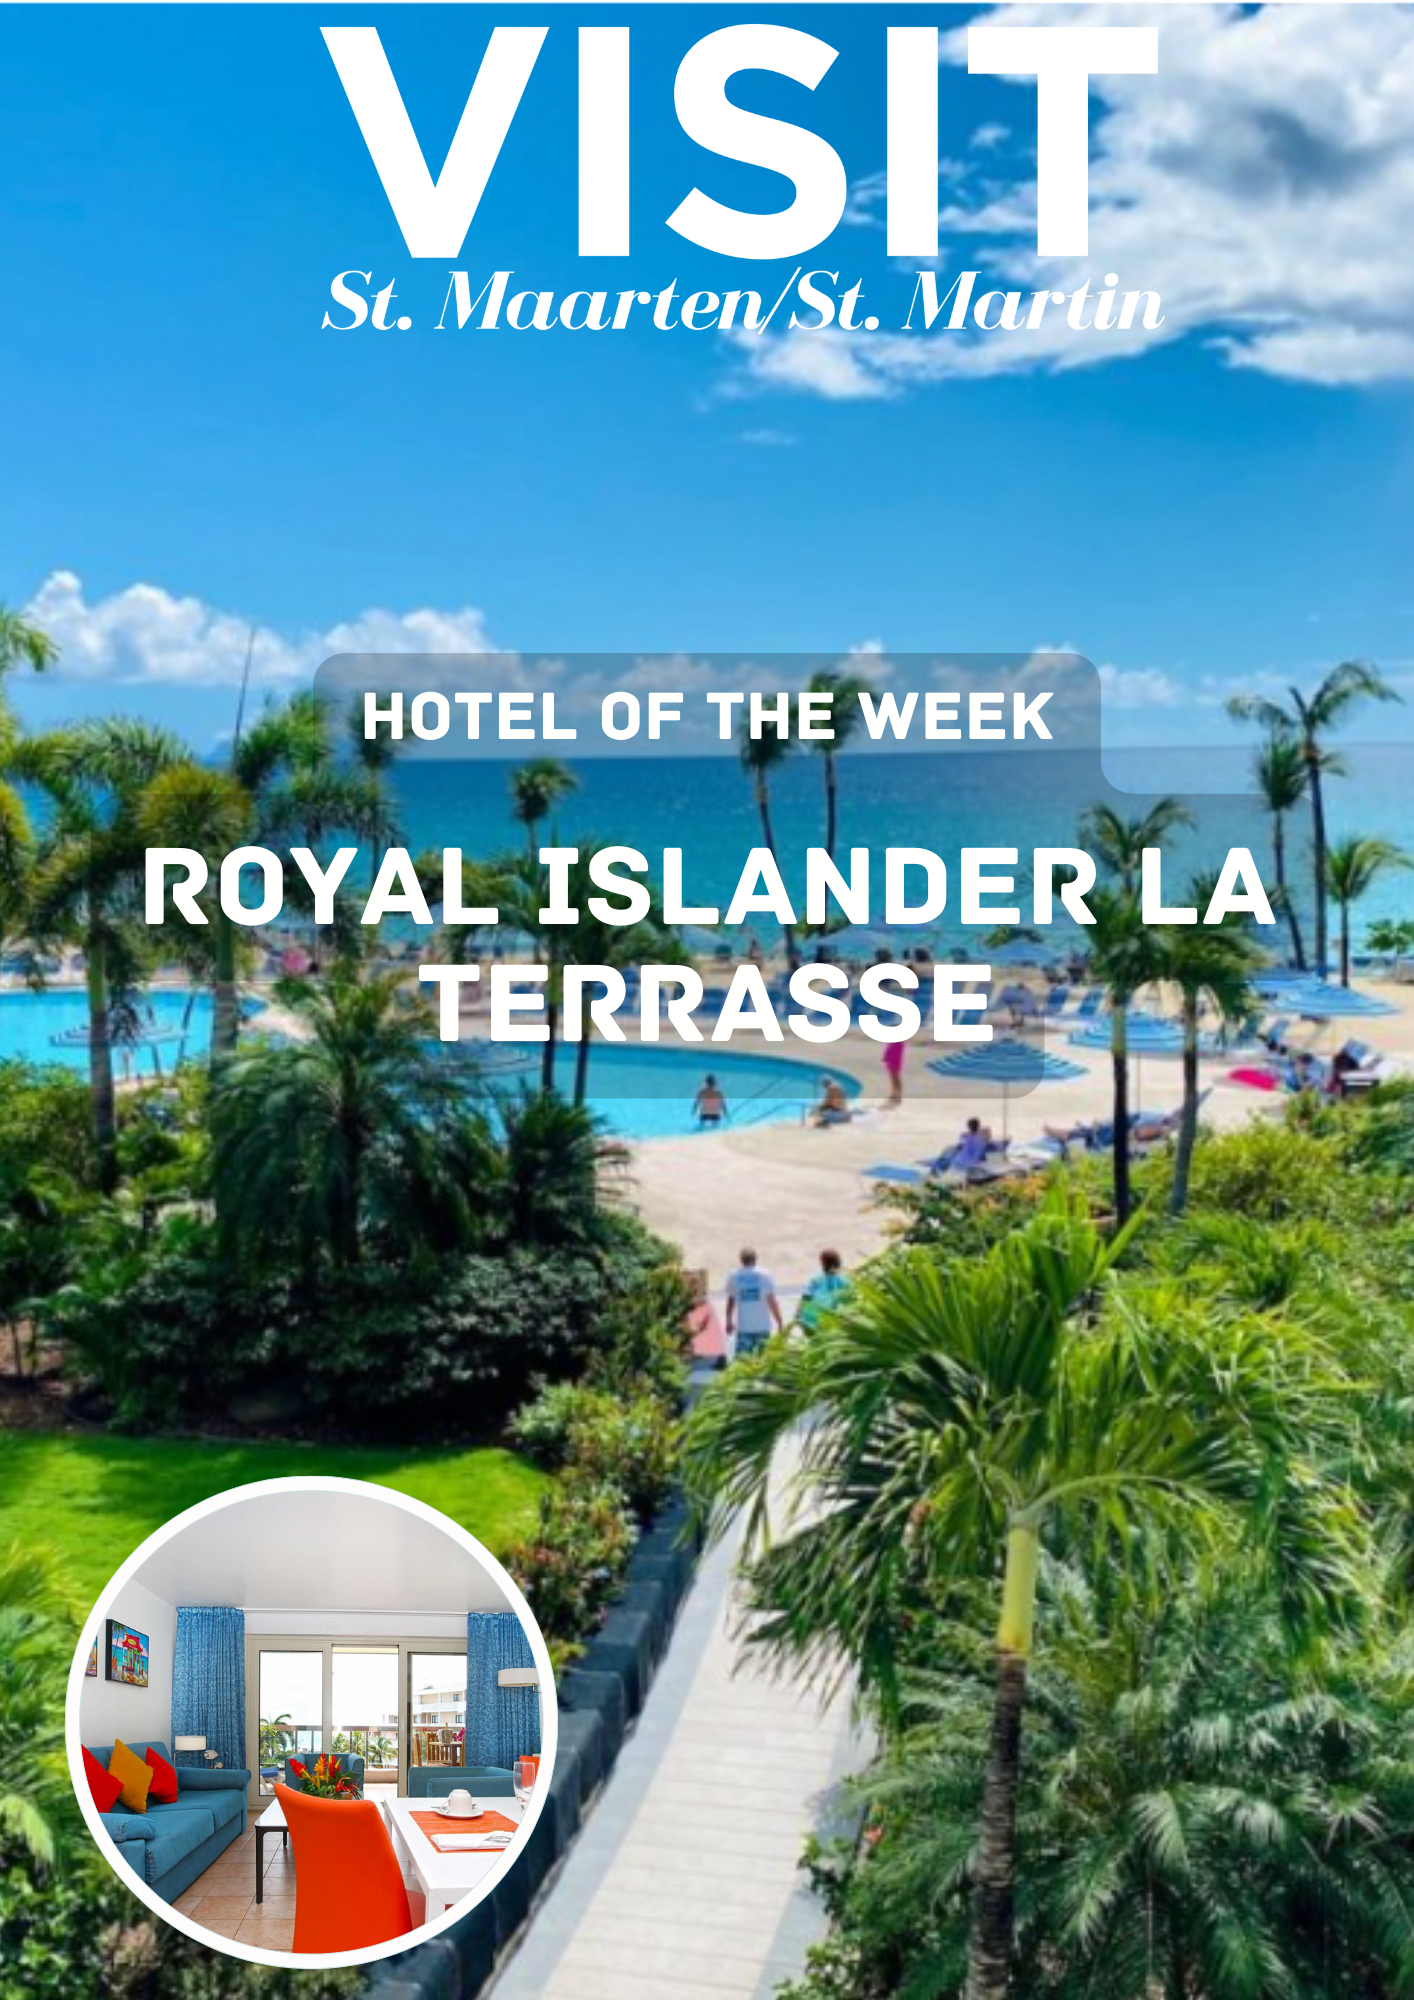 Hotel of the week Royal Islander La Terrasse located near the famous Maho Beach also called Airport beach because of its proximity to the Princess Juliana International airport SXM